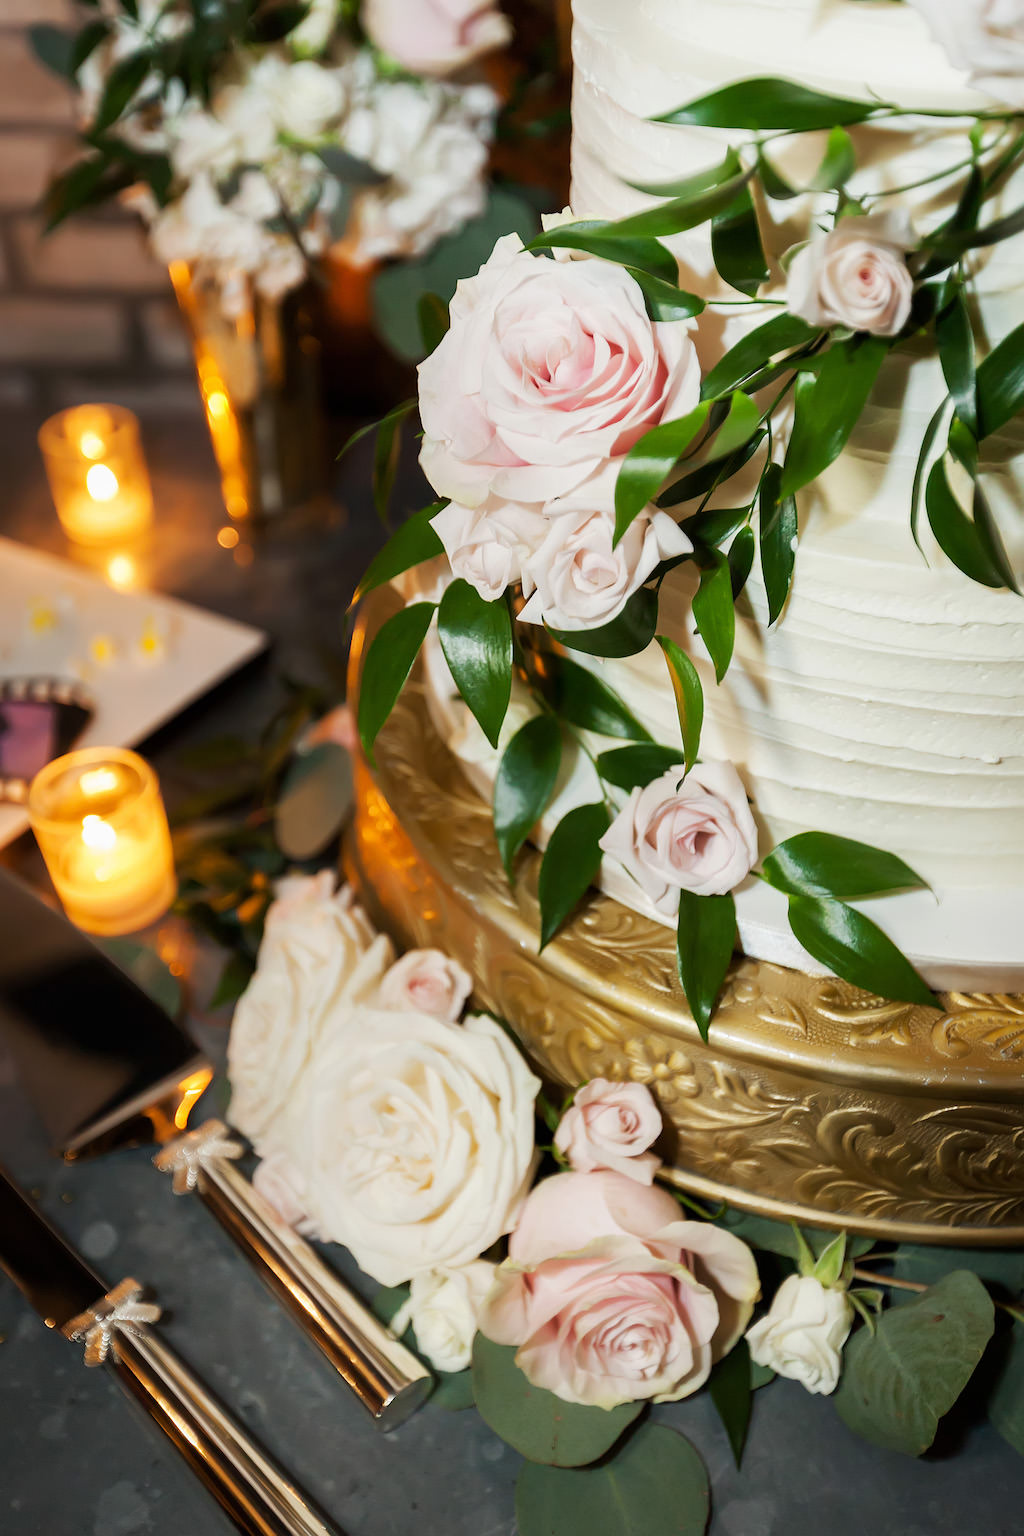 Round White Wedding Cake with Pink Rose and Greenery on Gold Cake Stand